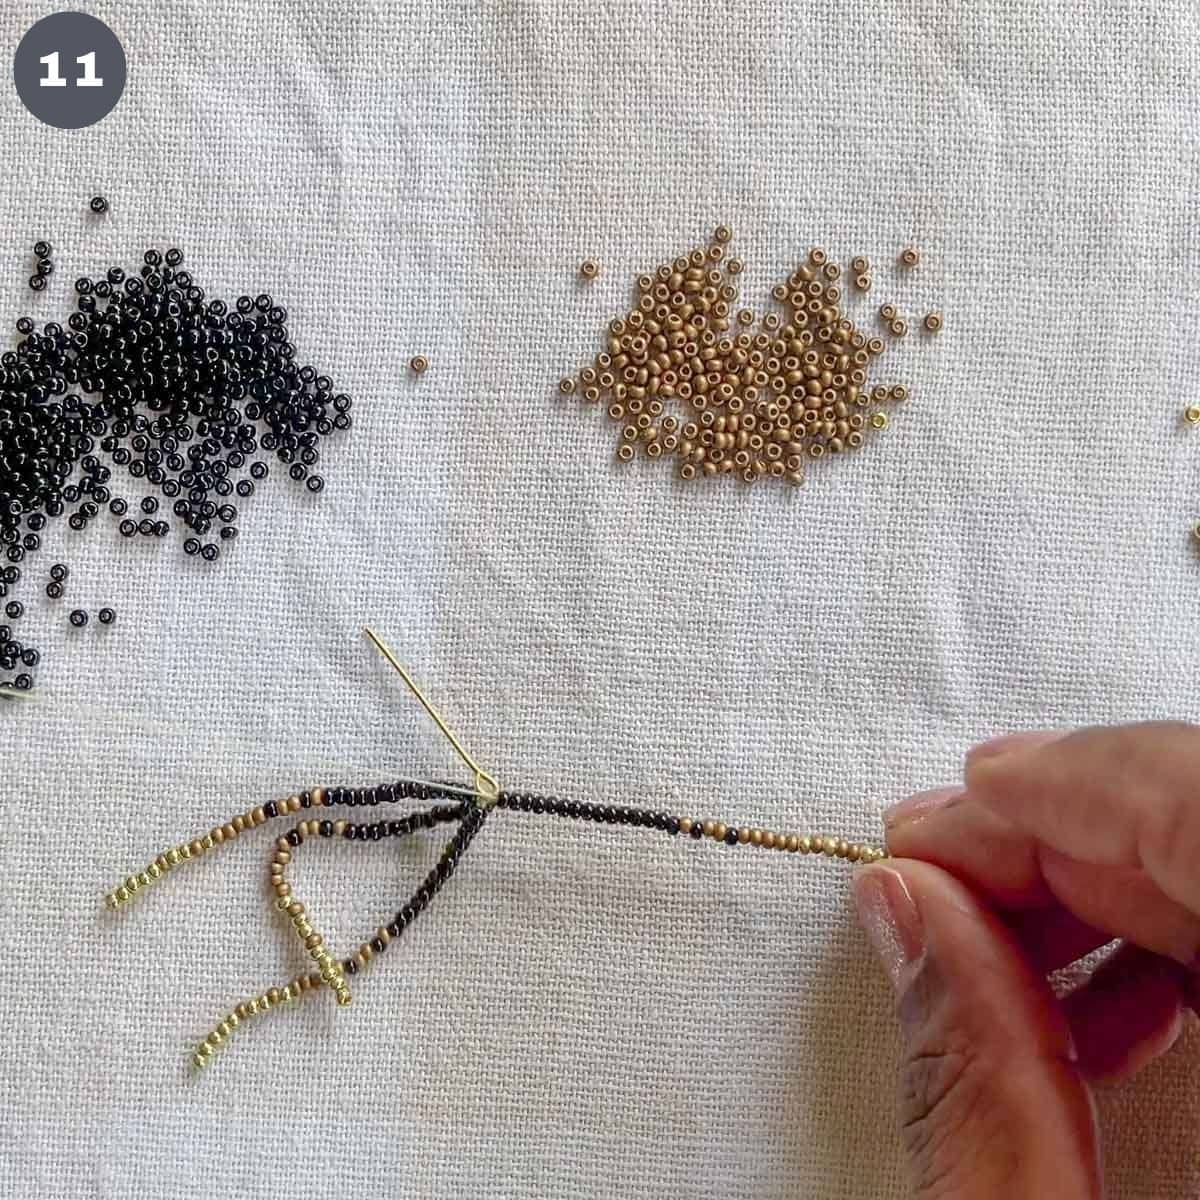 4 strands of beads attached to an eye pin.